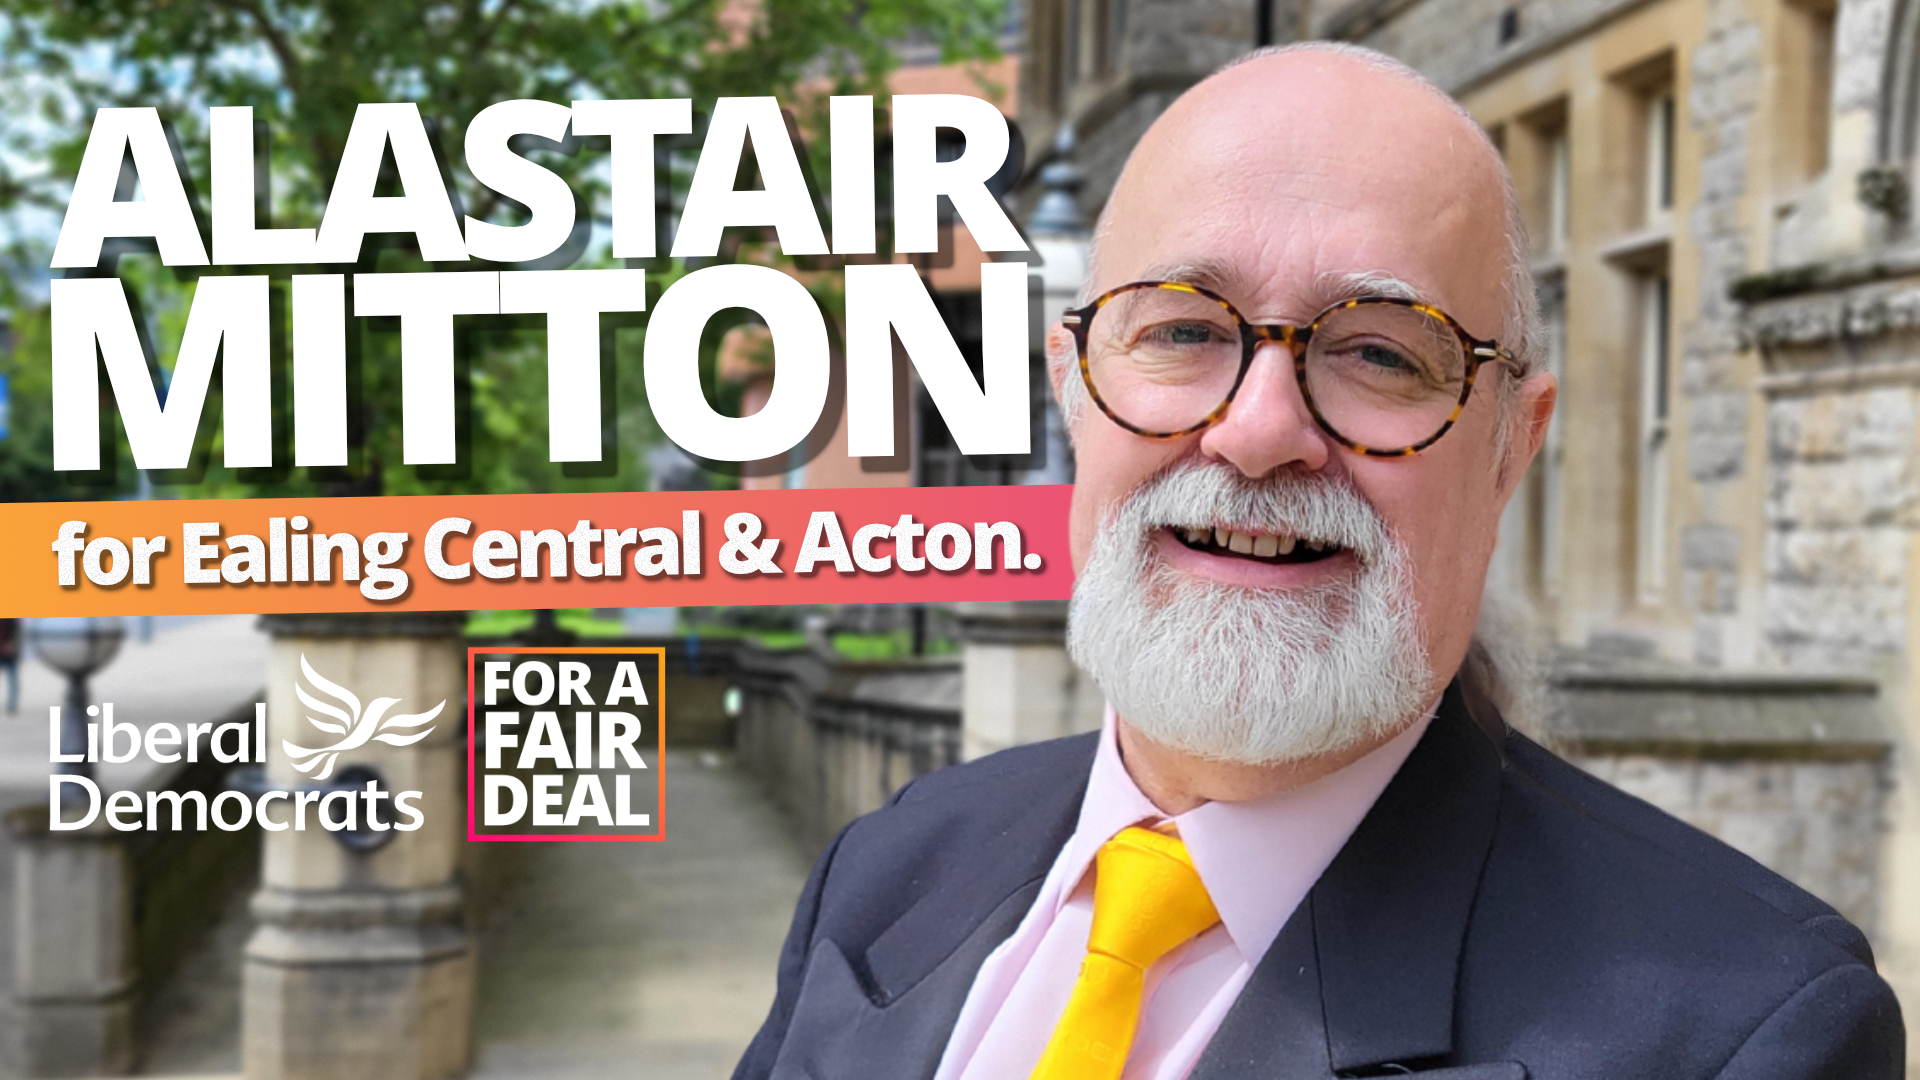 Alastair Mitton for Ealing Central & Acton